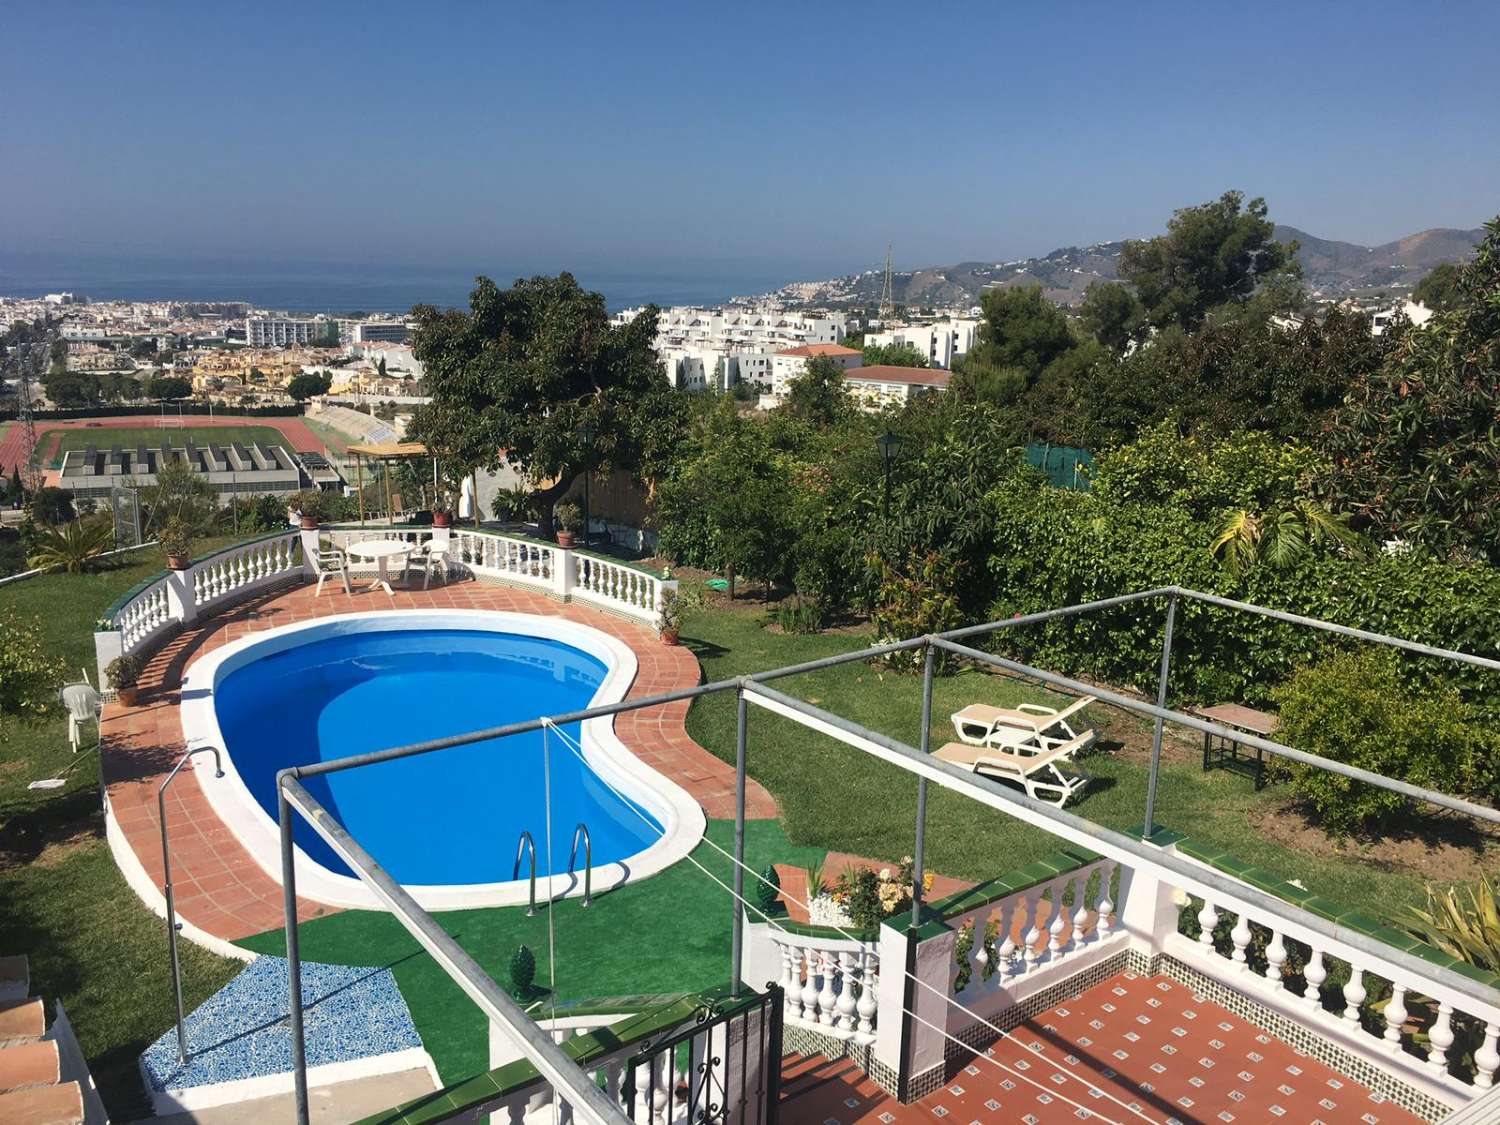 THREE BEDROOM VILLA WITH LARGE GARDEN AND POOL AREA AND SEA VIEWS